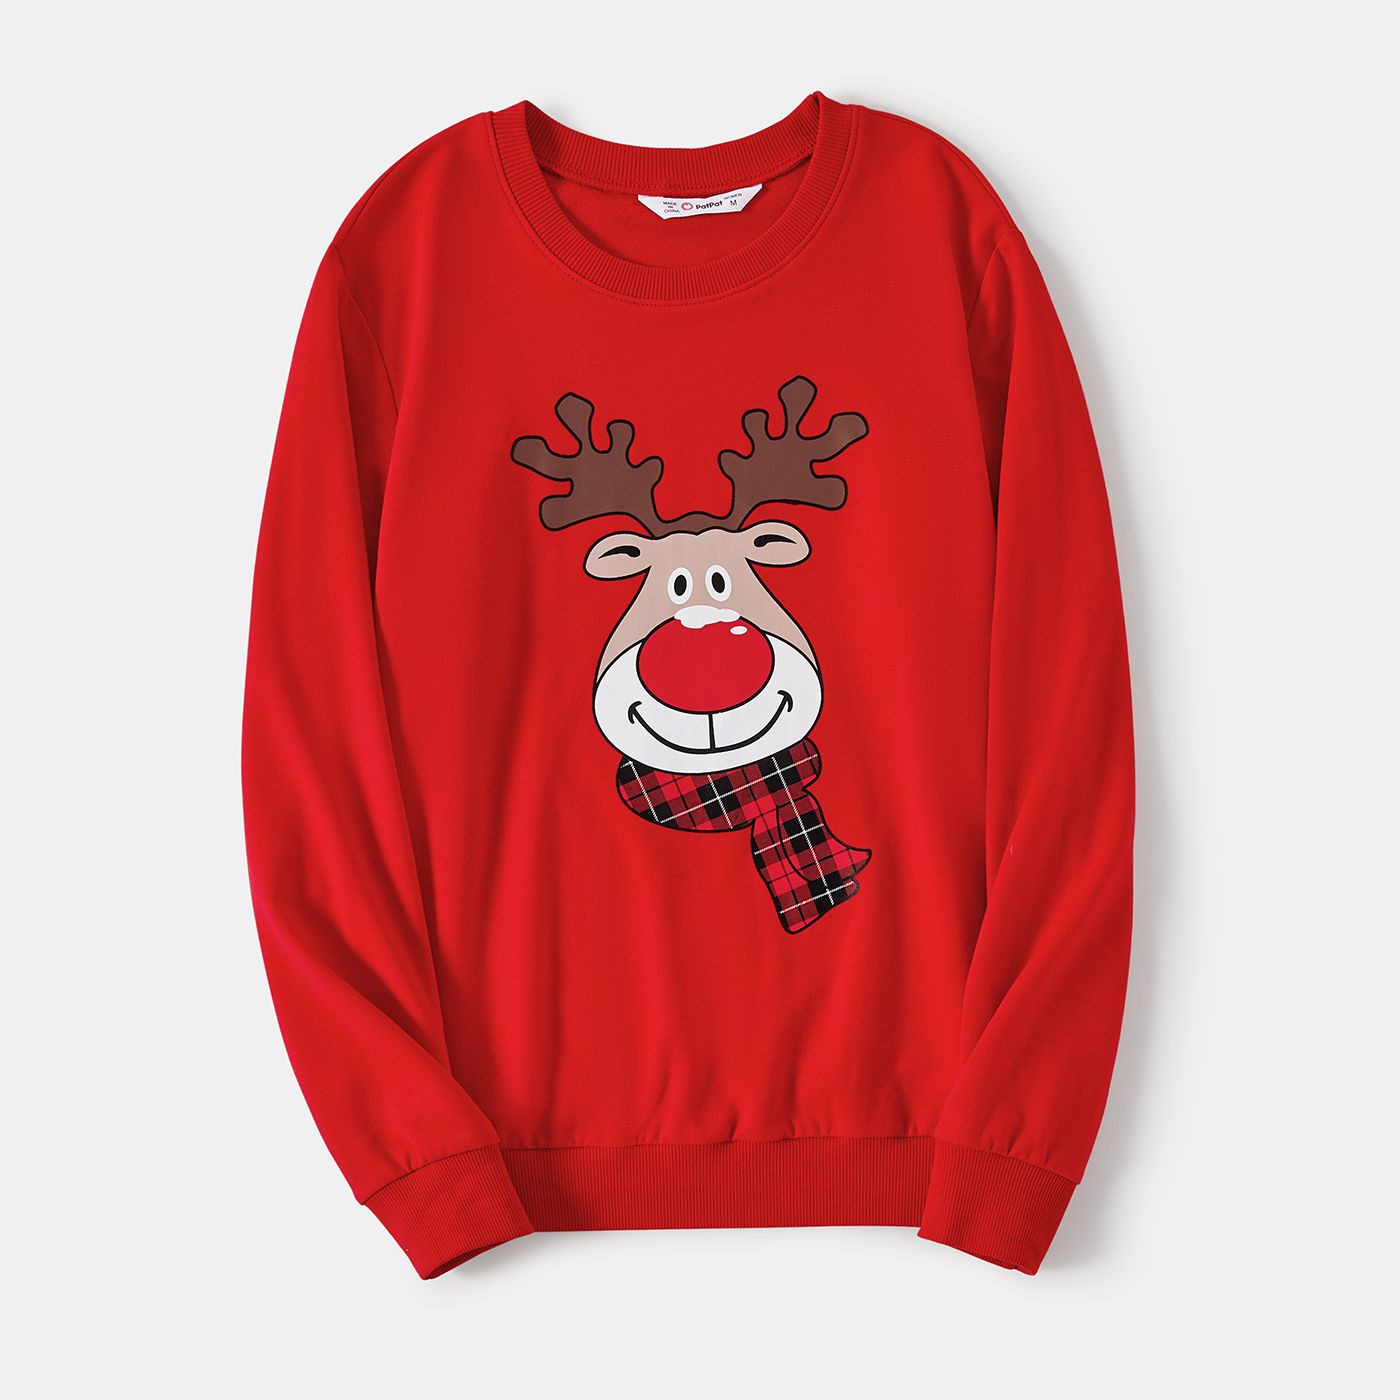 Christmas Family Matching Reindeer Print Red Tops